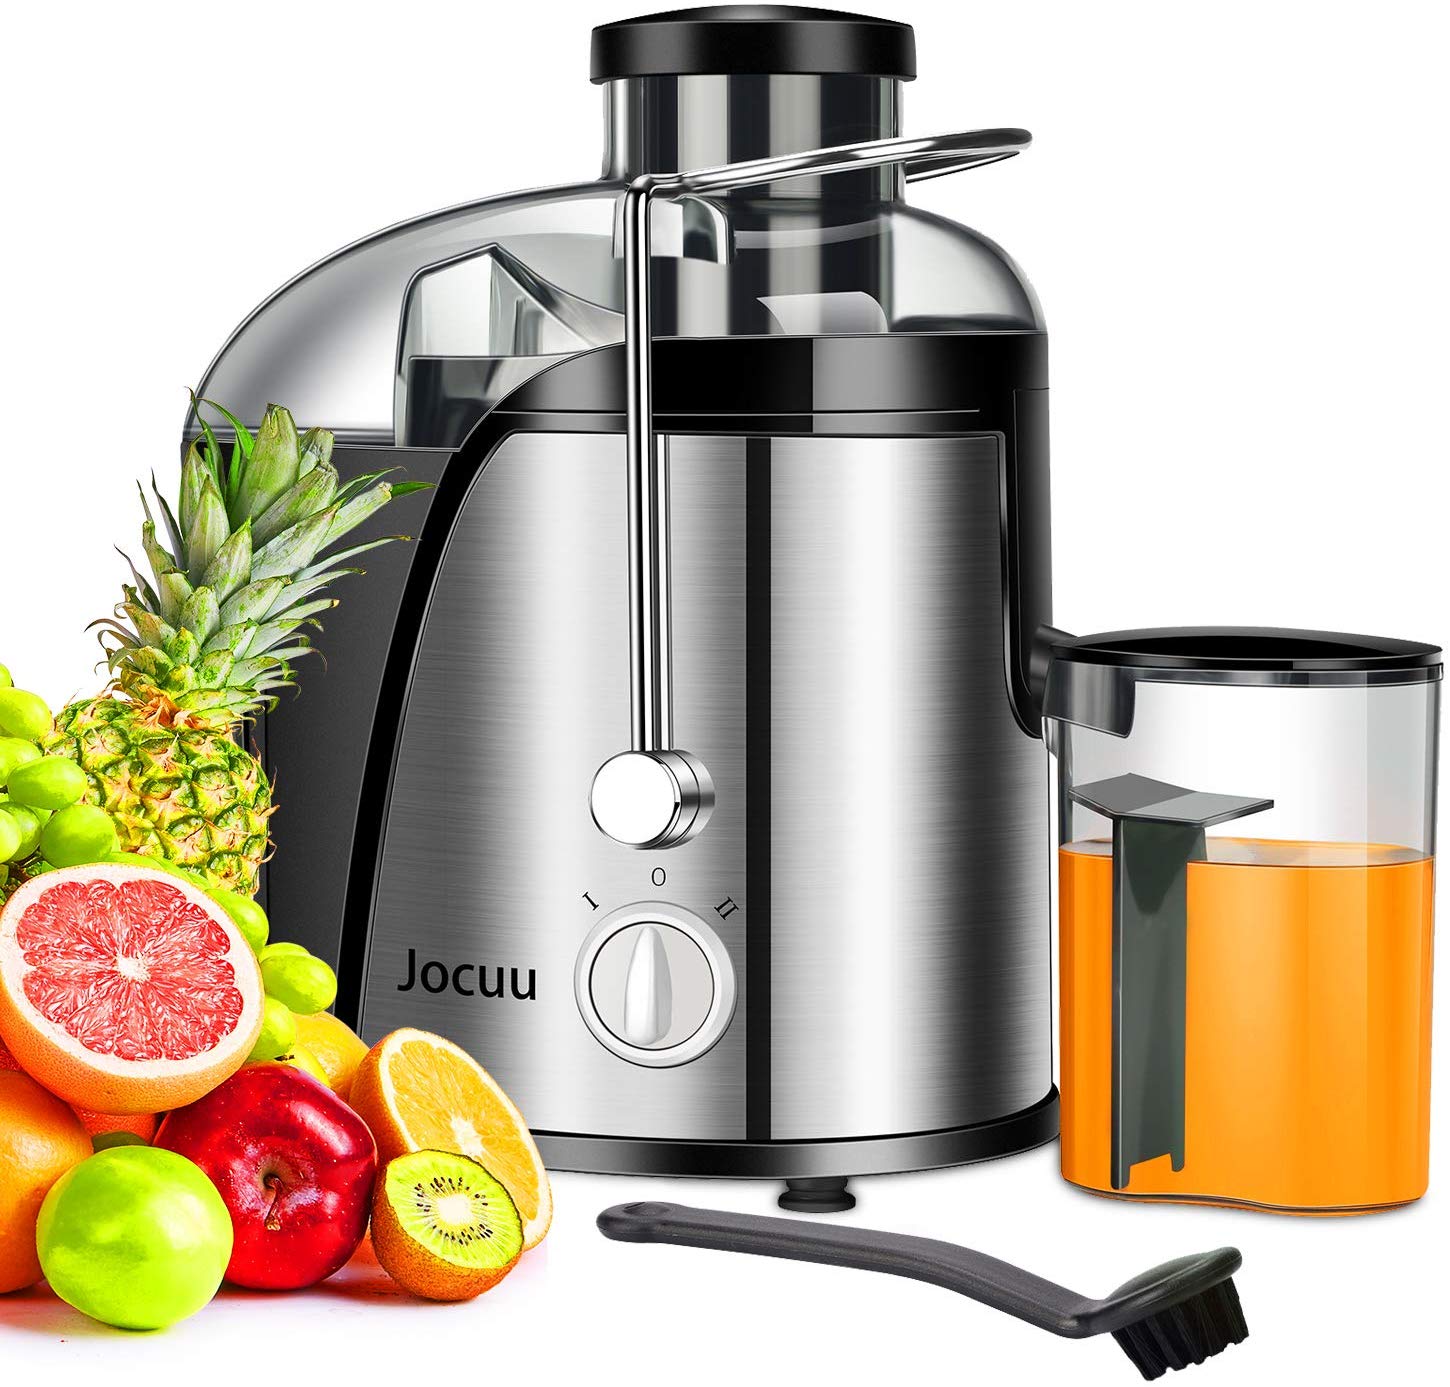 Ranking The Best Juicers of 2020 Fitbug